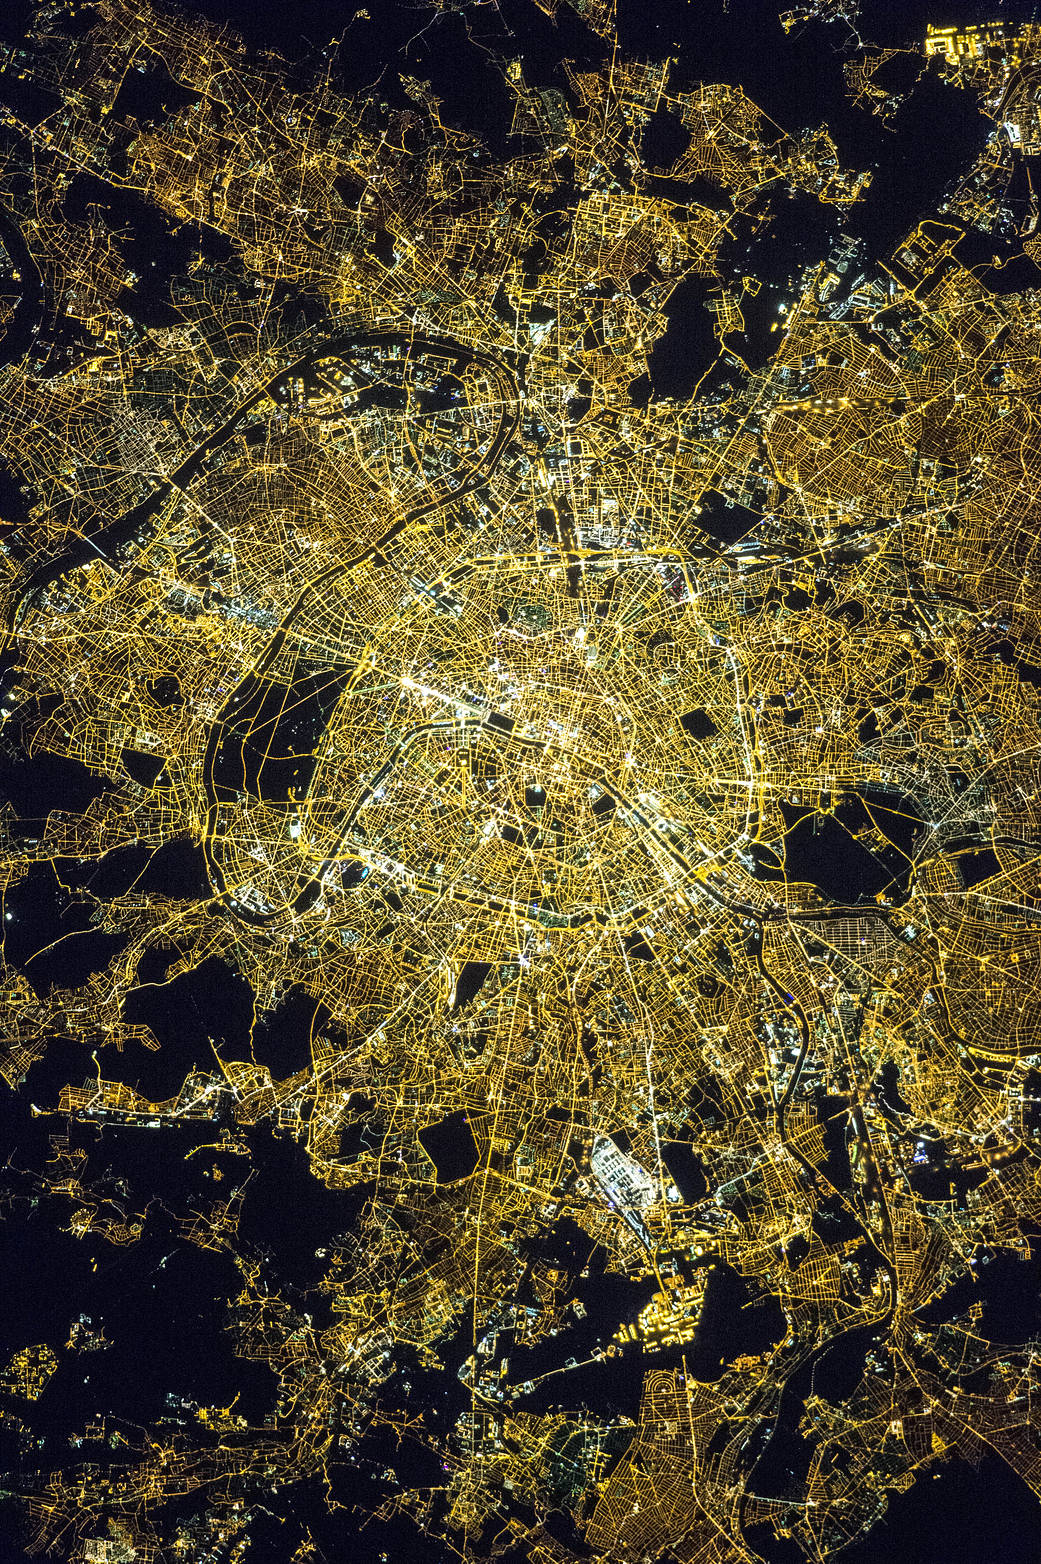 Nighttime view of the city of Paris from low Earth orbit showing bright streetlights